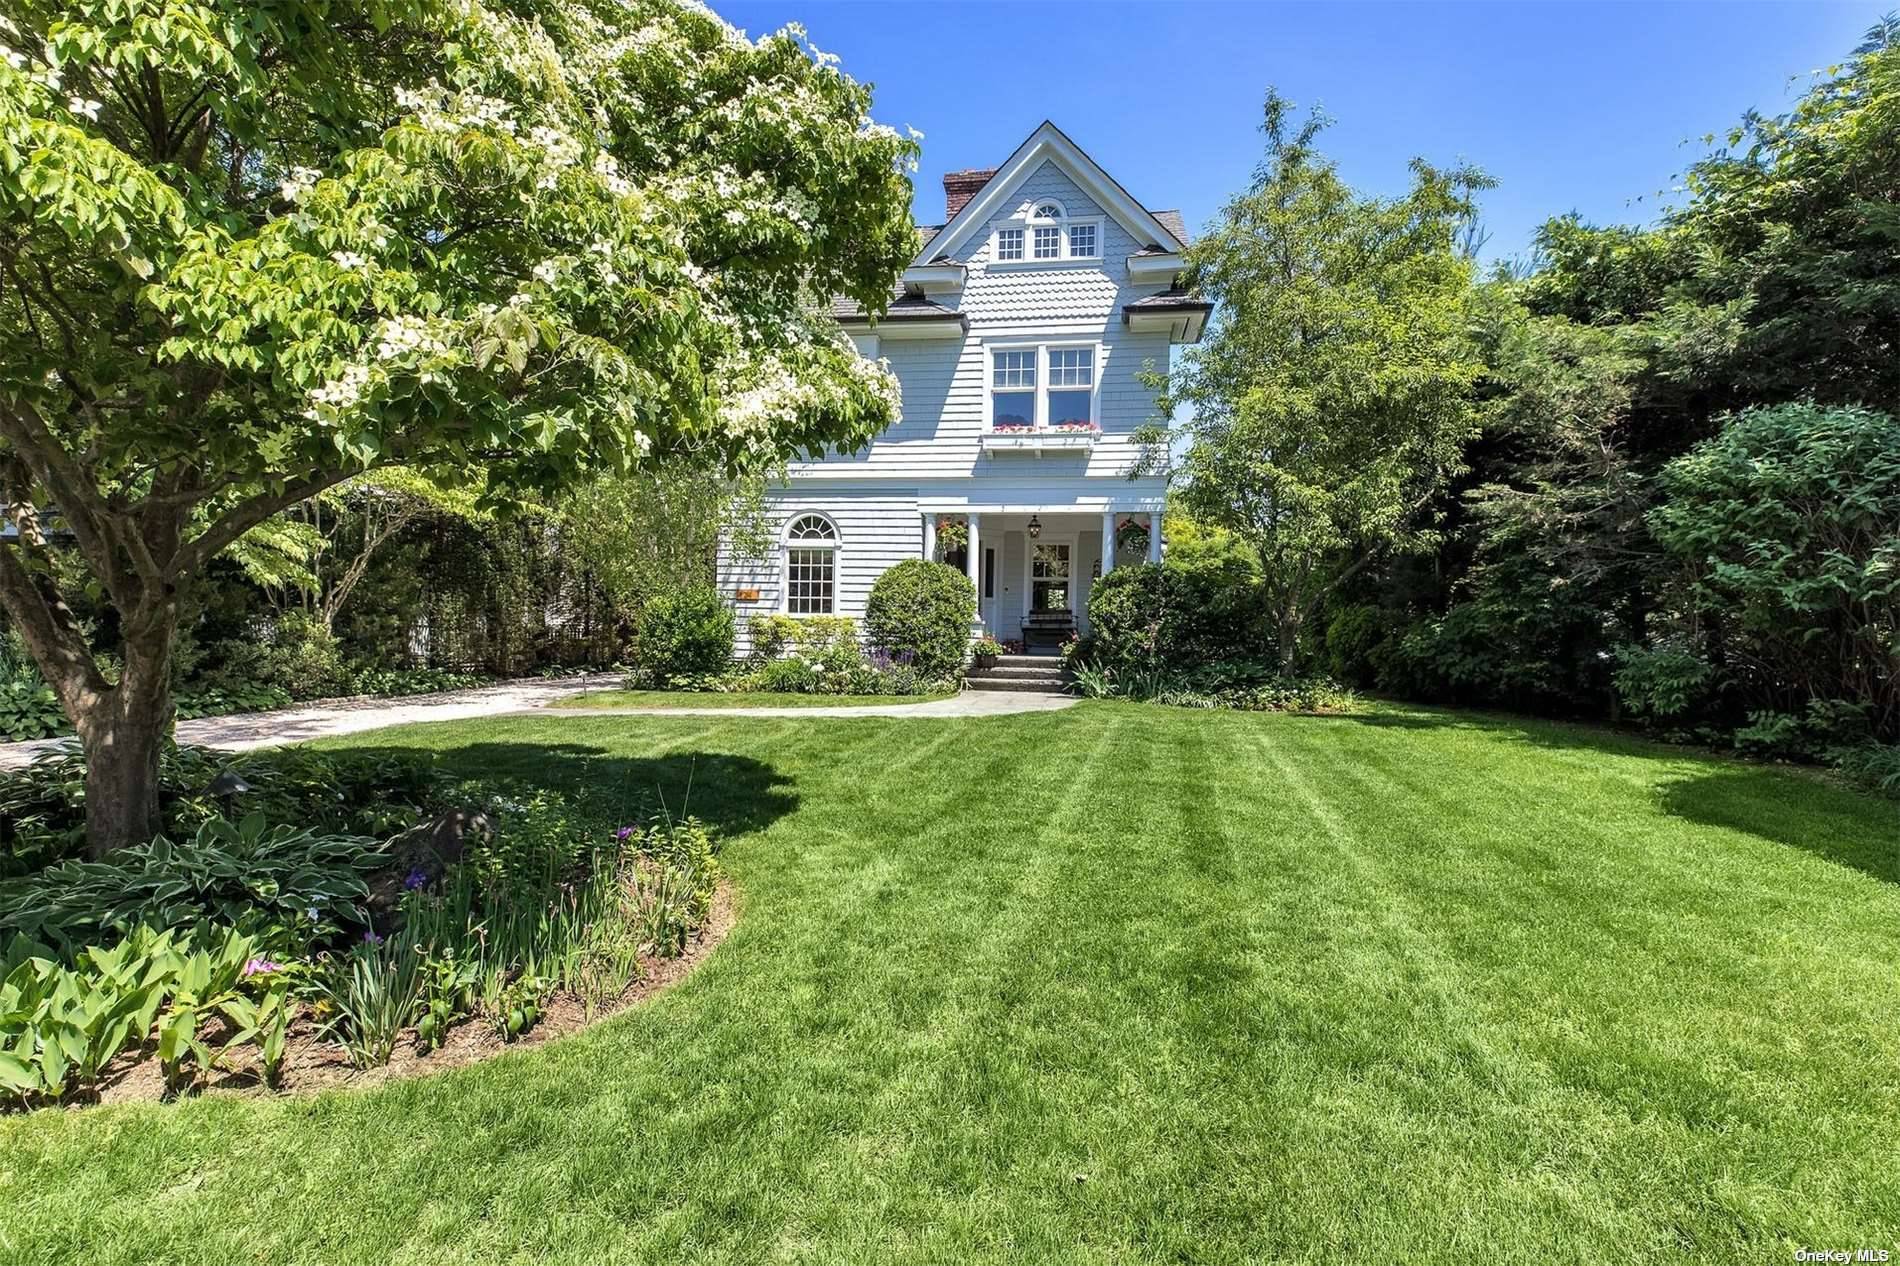 This 5 bedroom, 4. 5 bath Plandome colonial has been masterfully gut renovated and expanded in 2006 offering beautiful bespoke architectural details.